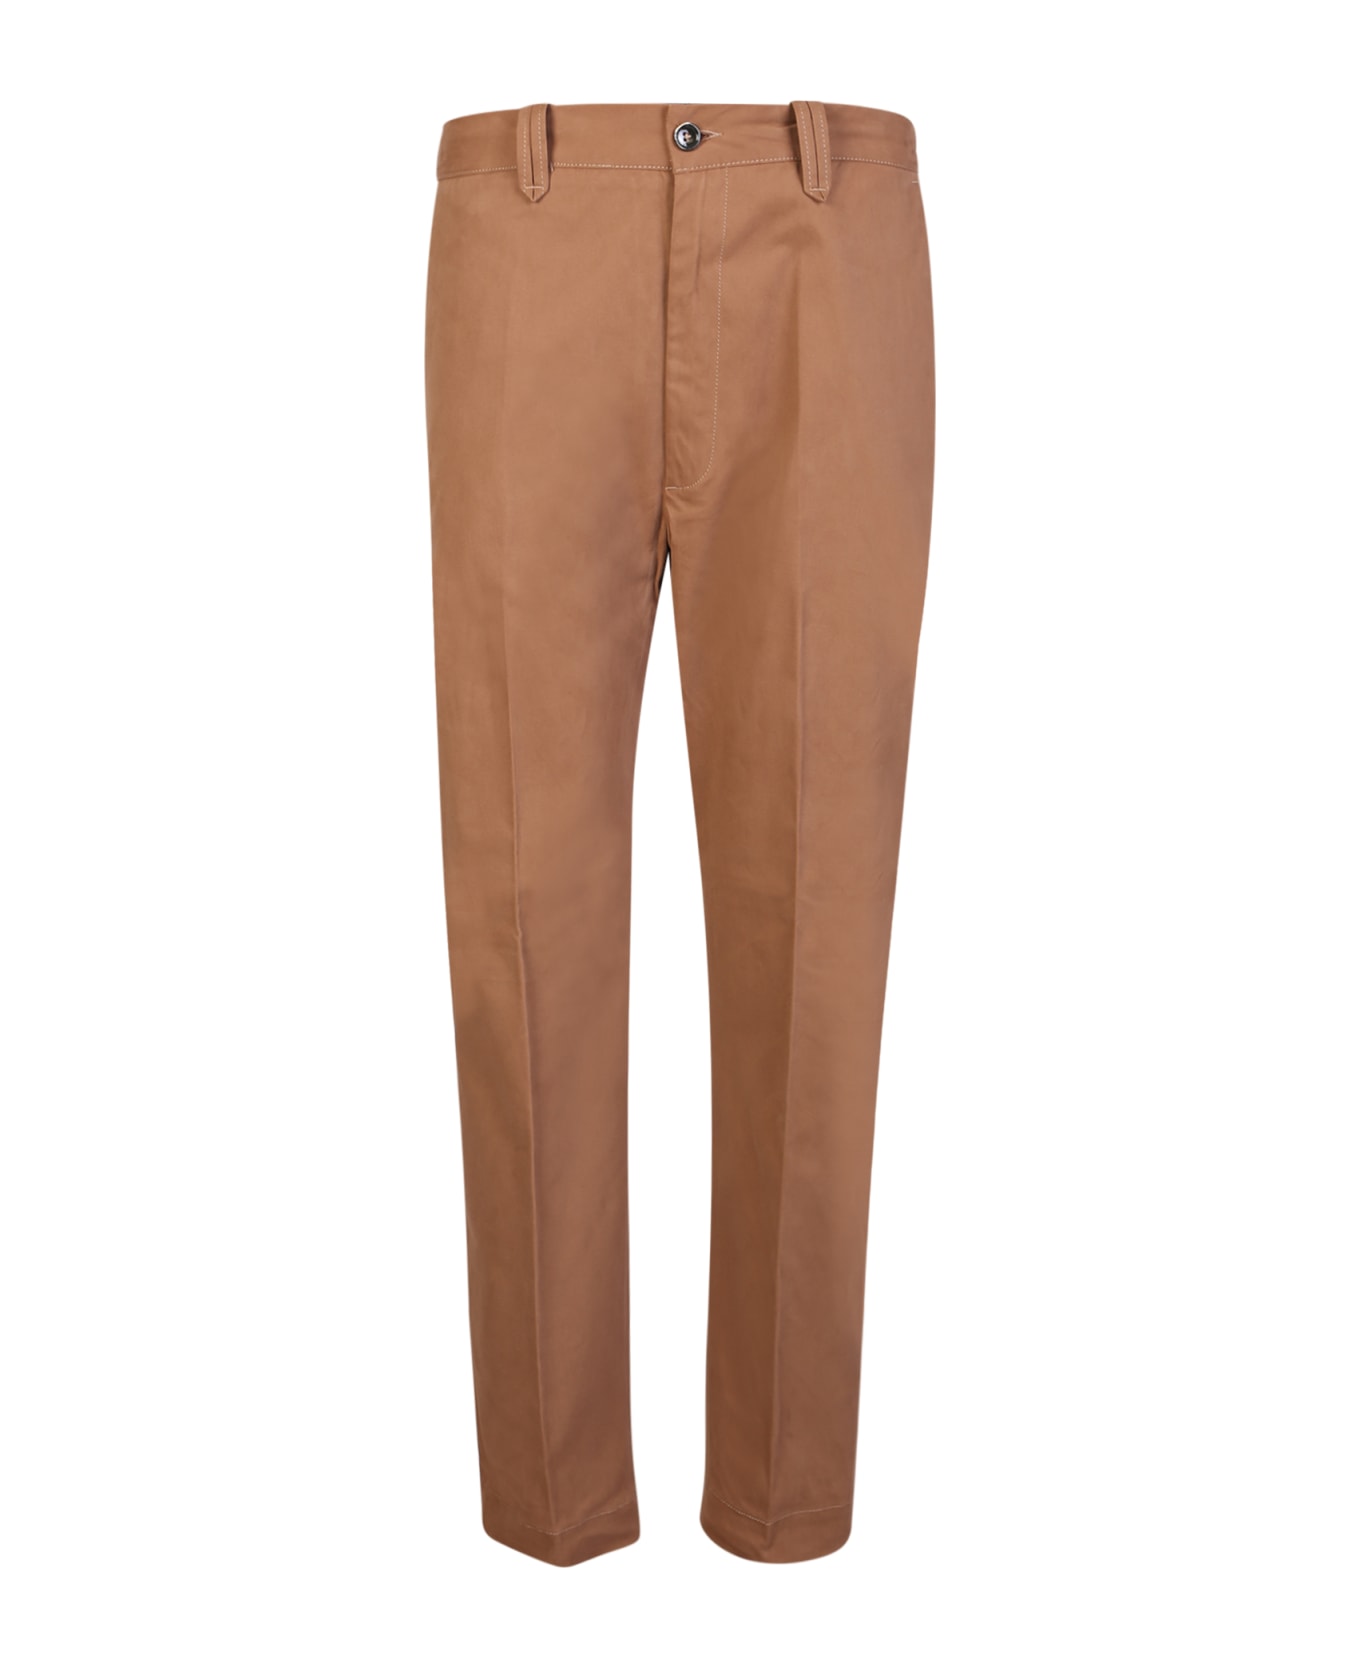 Nine in the Morning Bisquit Yoga Trousers - Beige ボトムス